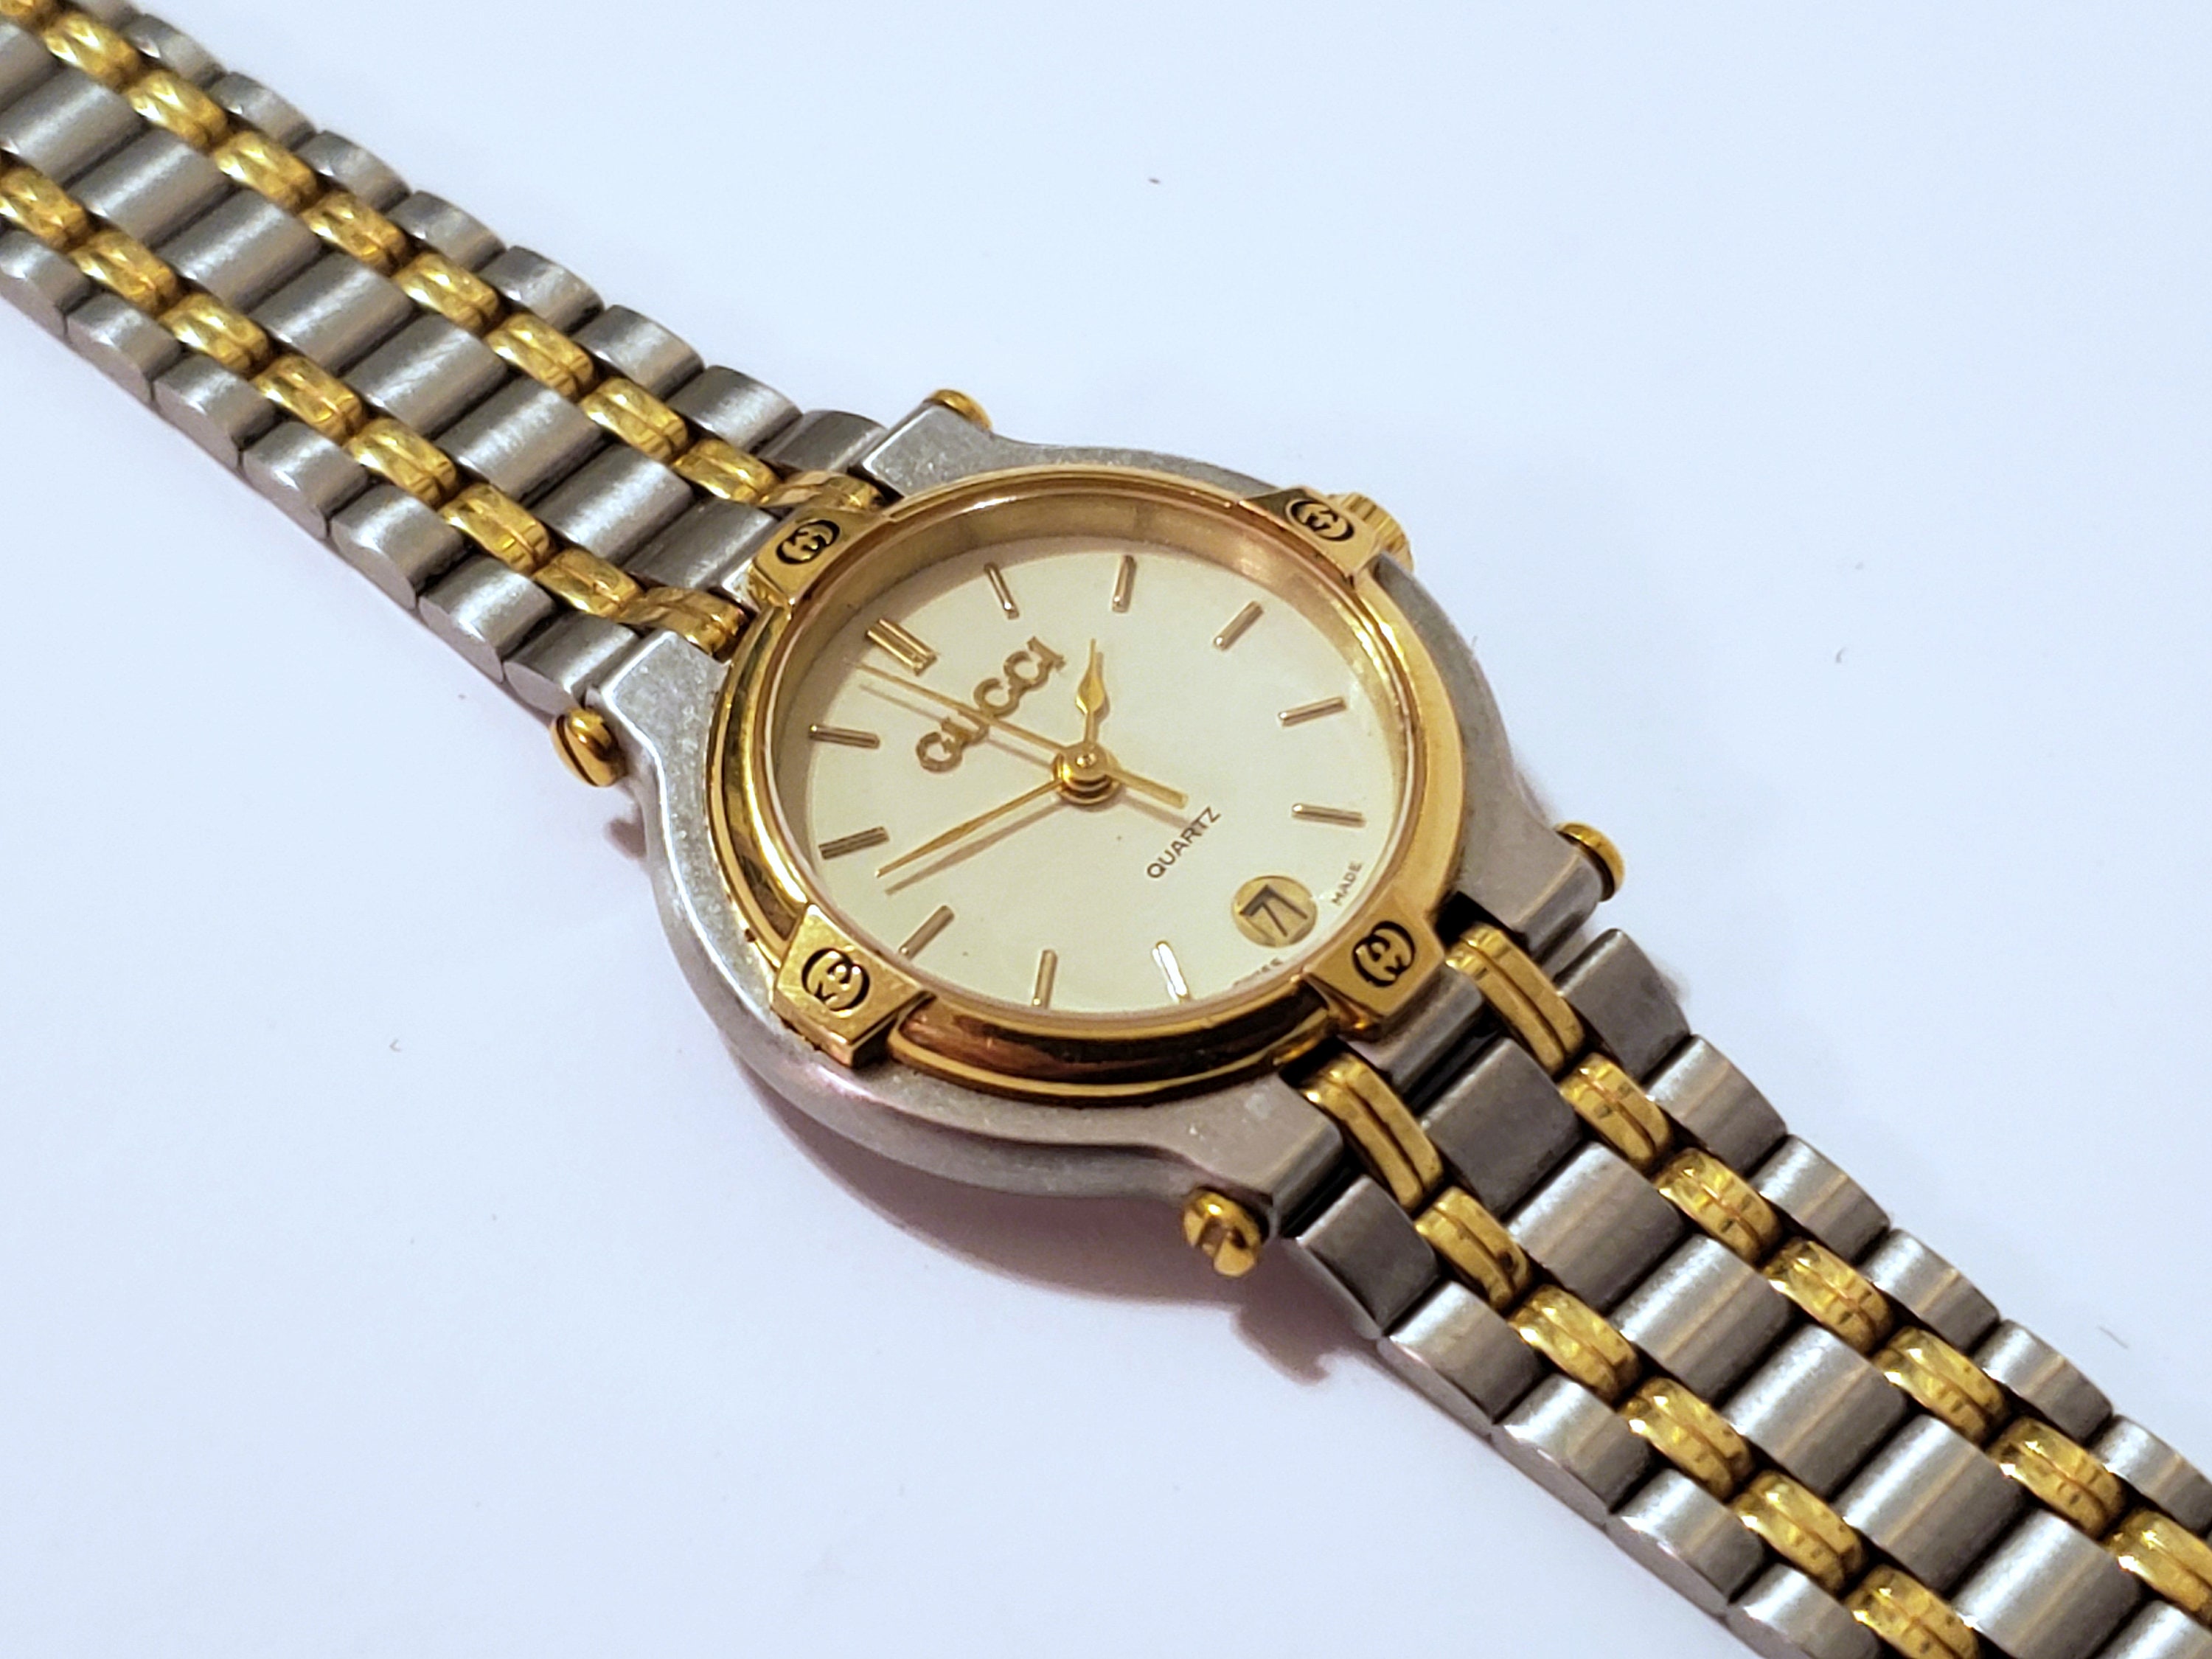 CLASSIC Elegance! Ladies Gucci 9000L watch - stainless steel yellow